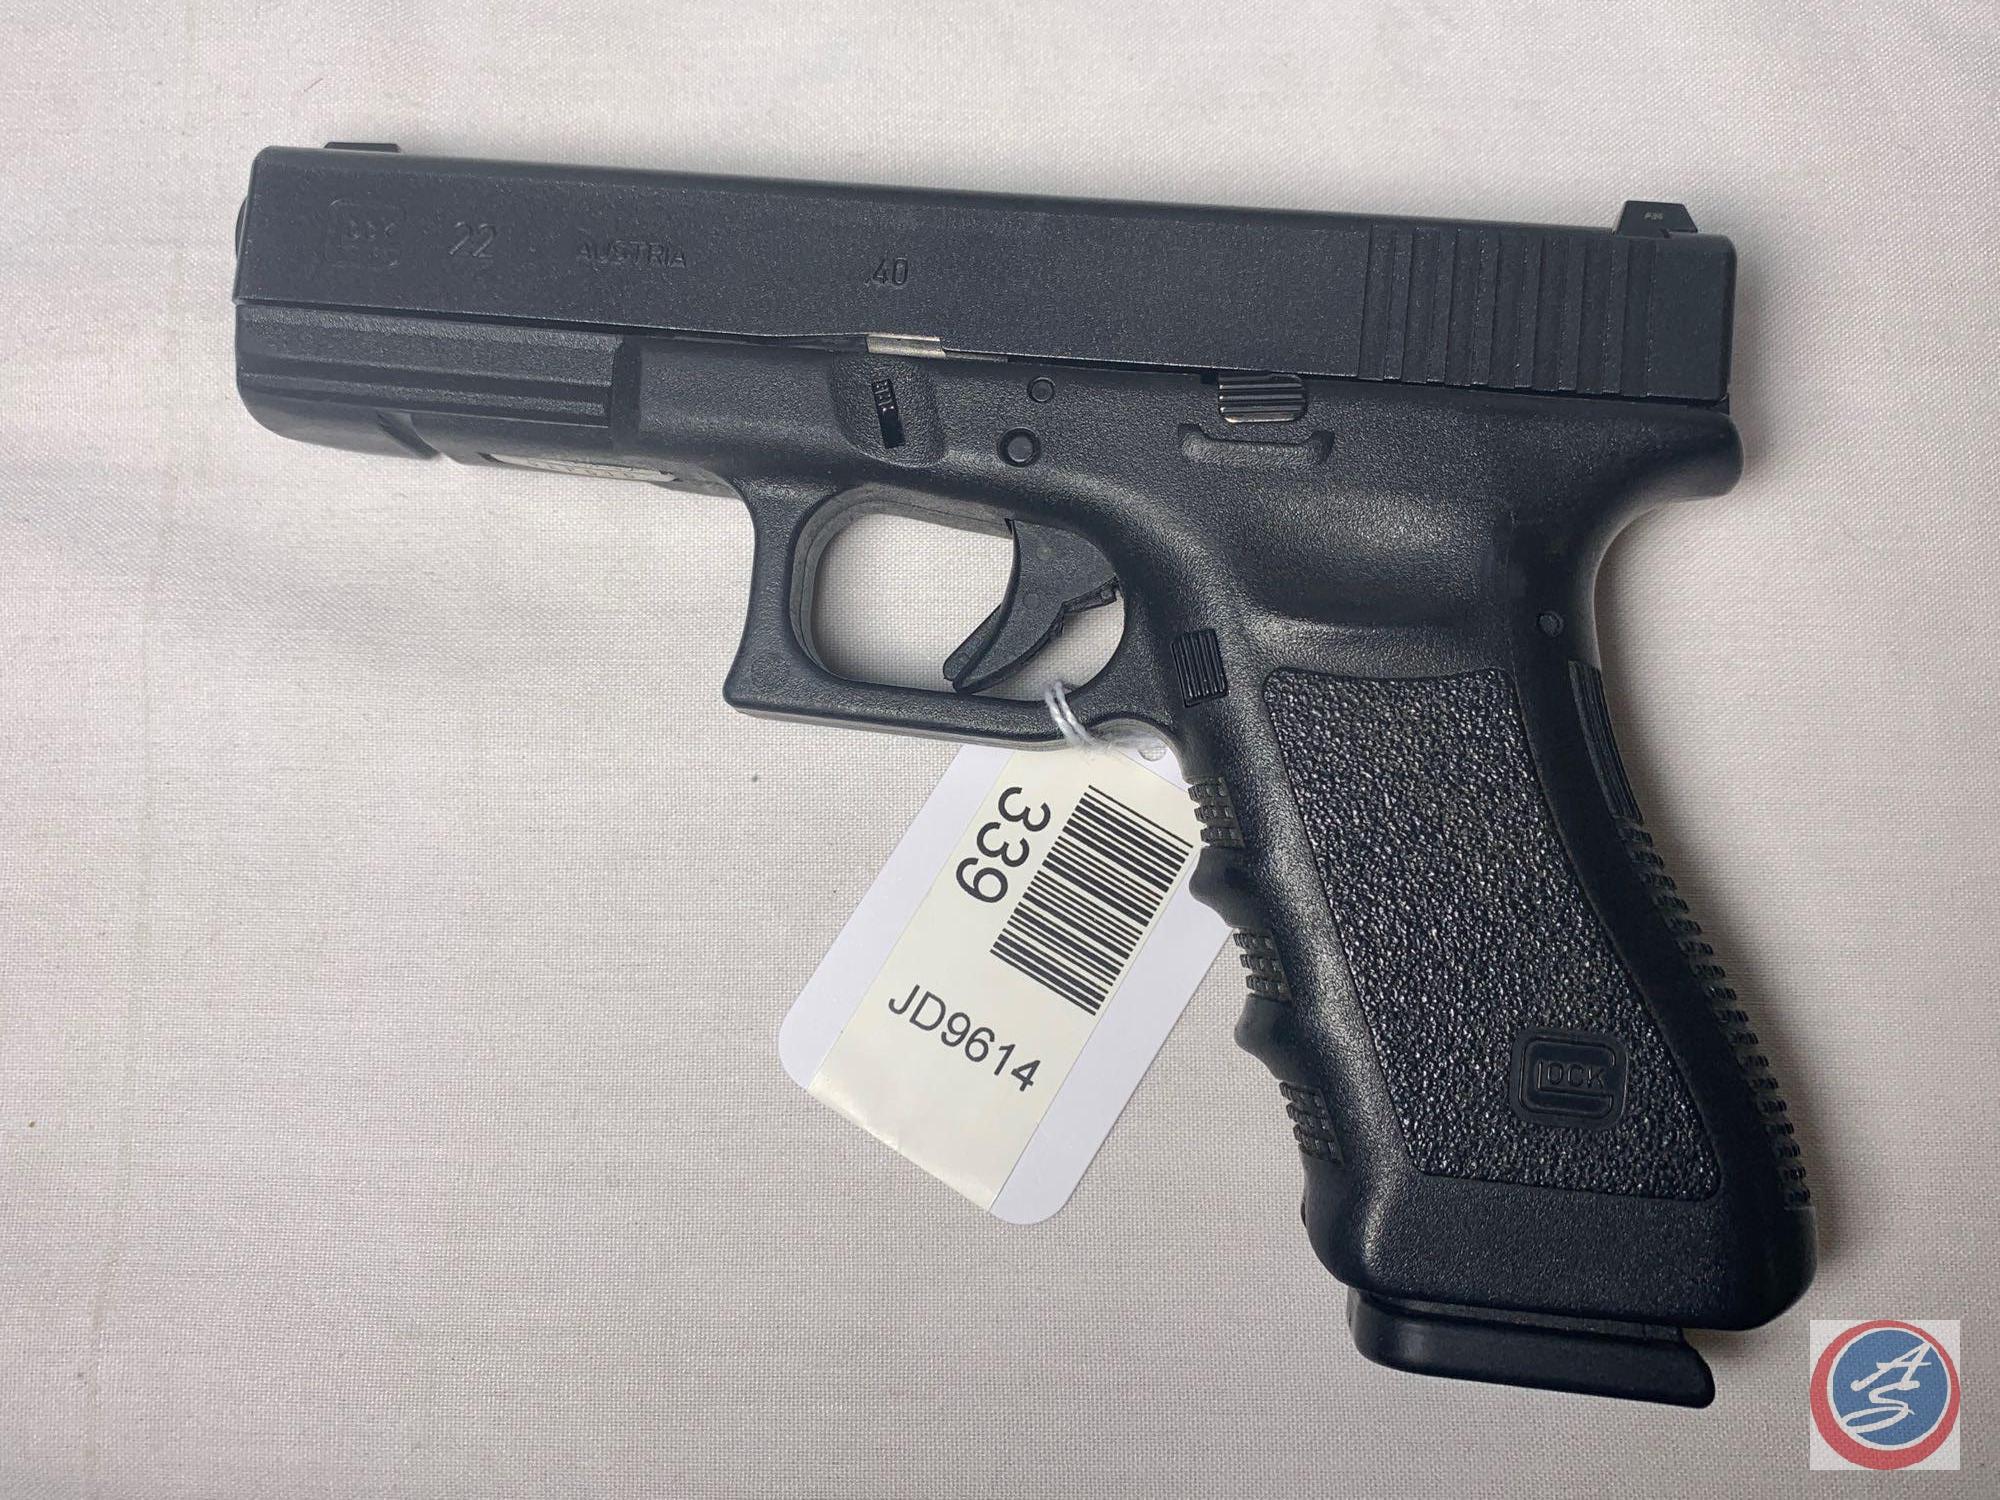 Glock Model 22 40 S & W Pistol Semi-Auto law Enforcement Issue with 3 Mags in Factory Box. in good